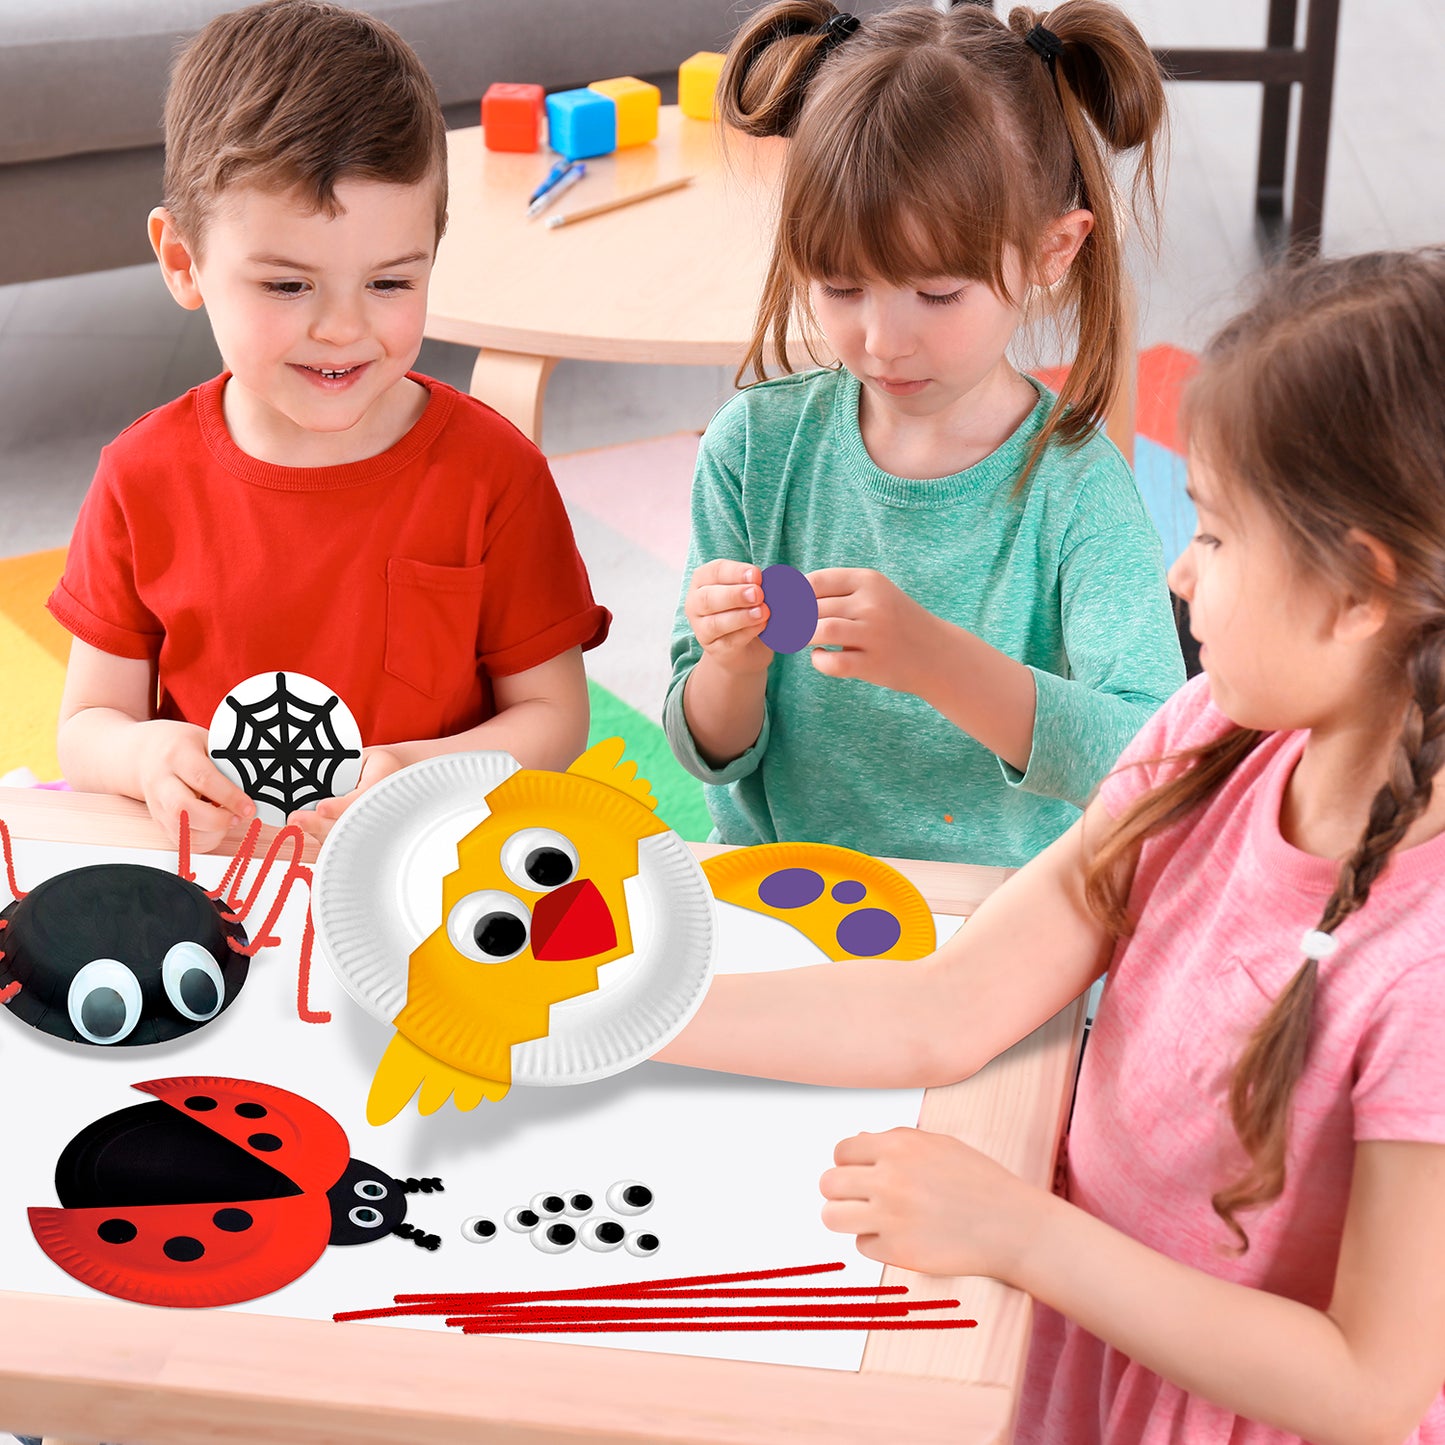 Arts and Crafts for Toddlers, Create Animal Crafts from Paper Plates, Includes All Supplies and Instructions, Best Craft Project Kit for Ages 2-5